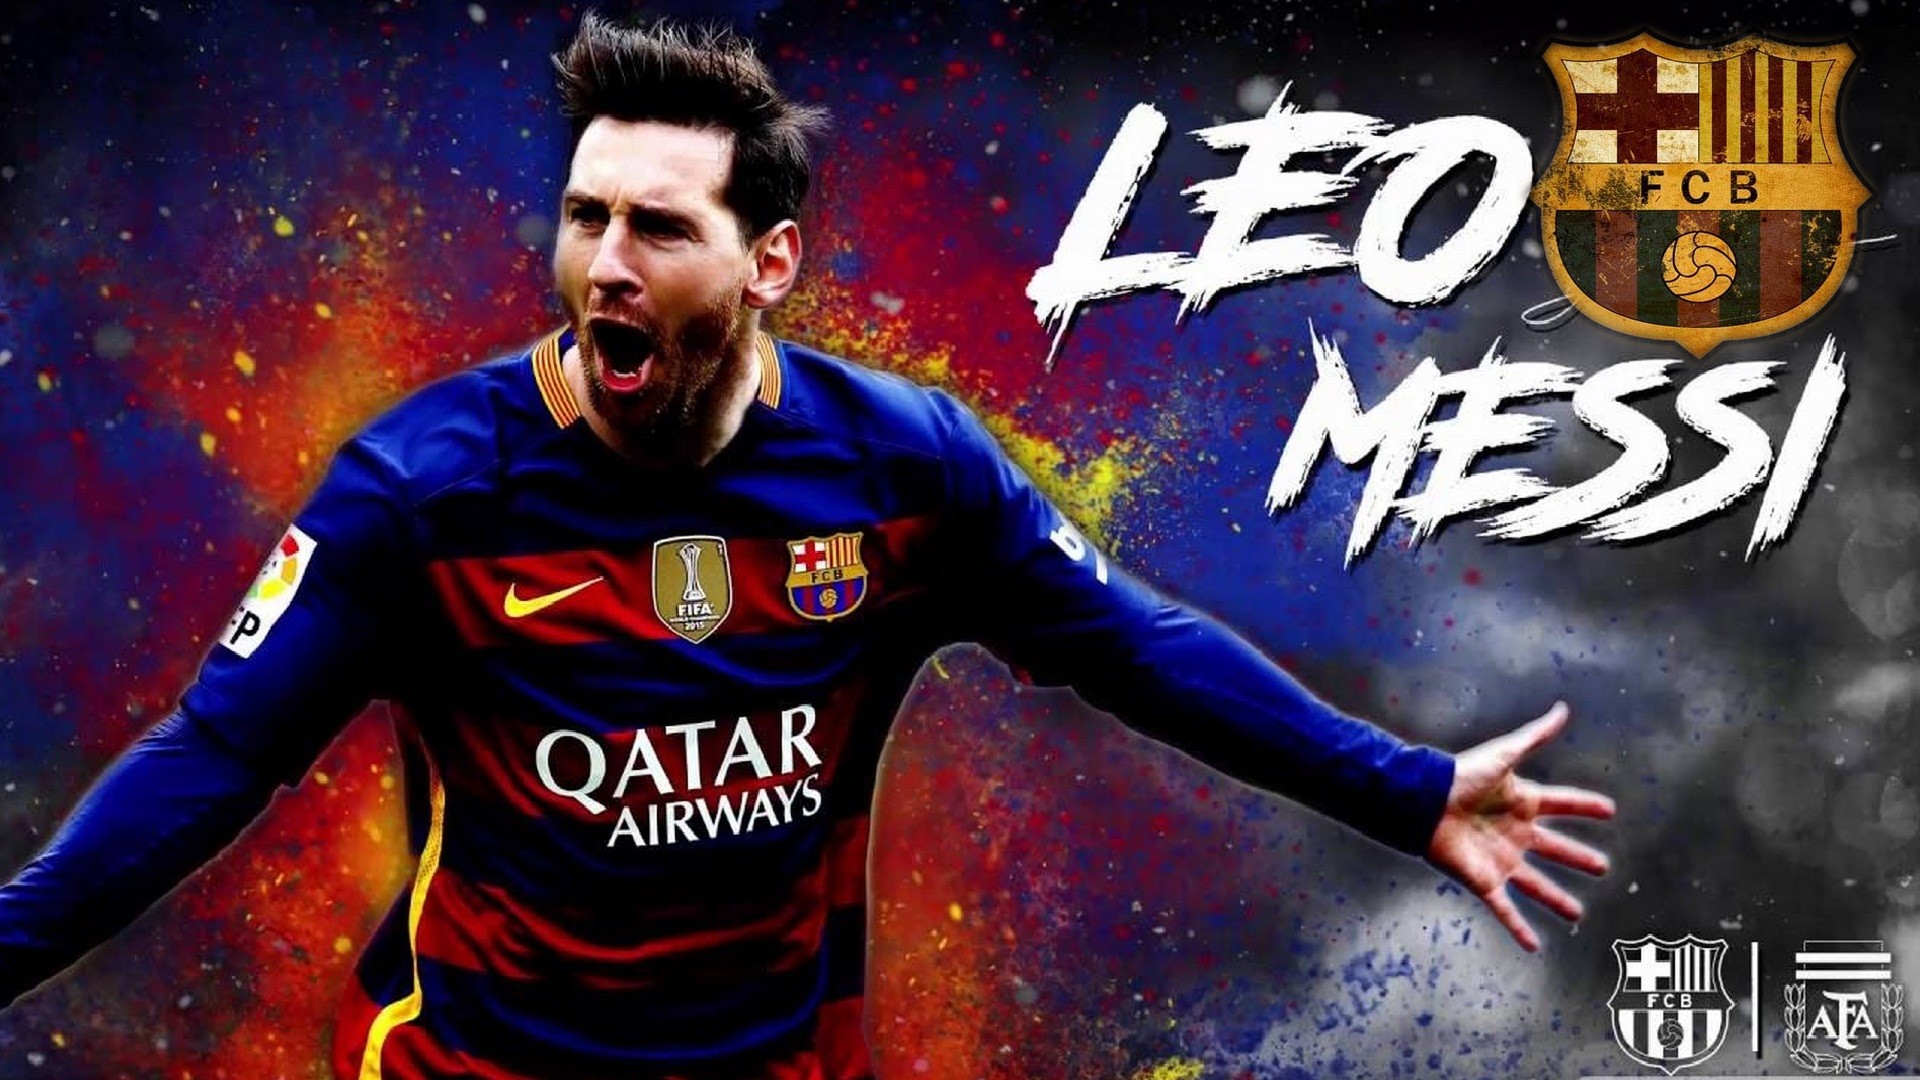 Messi Wallpaper with resolution 1920x1080 pixel. You can make this wallpaper for your Mac or Windows Desktop Background, iPhone, Android or Tablet and another Smartphone device